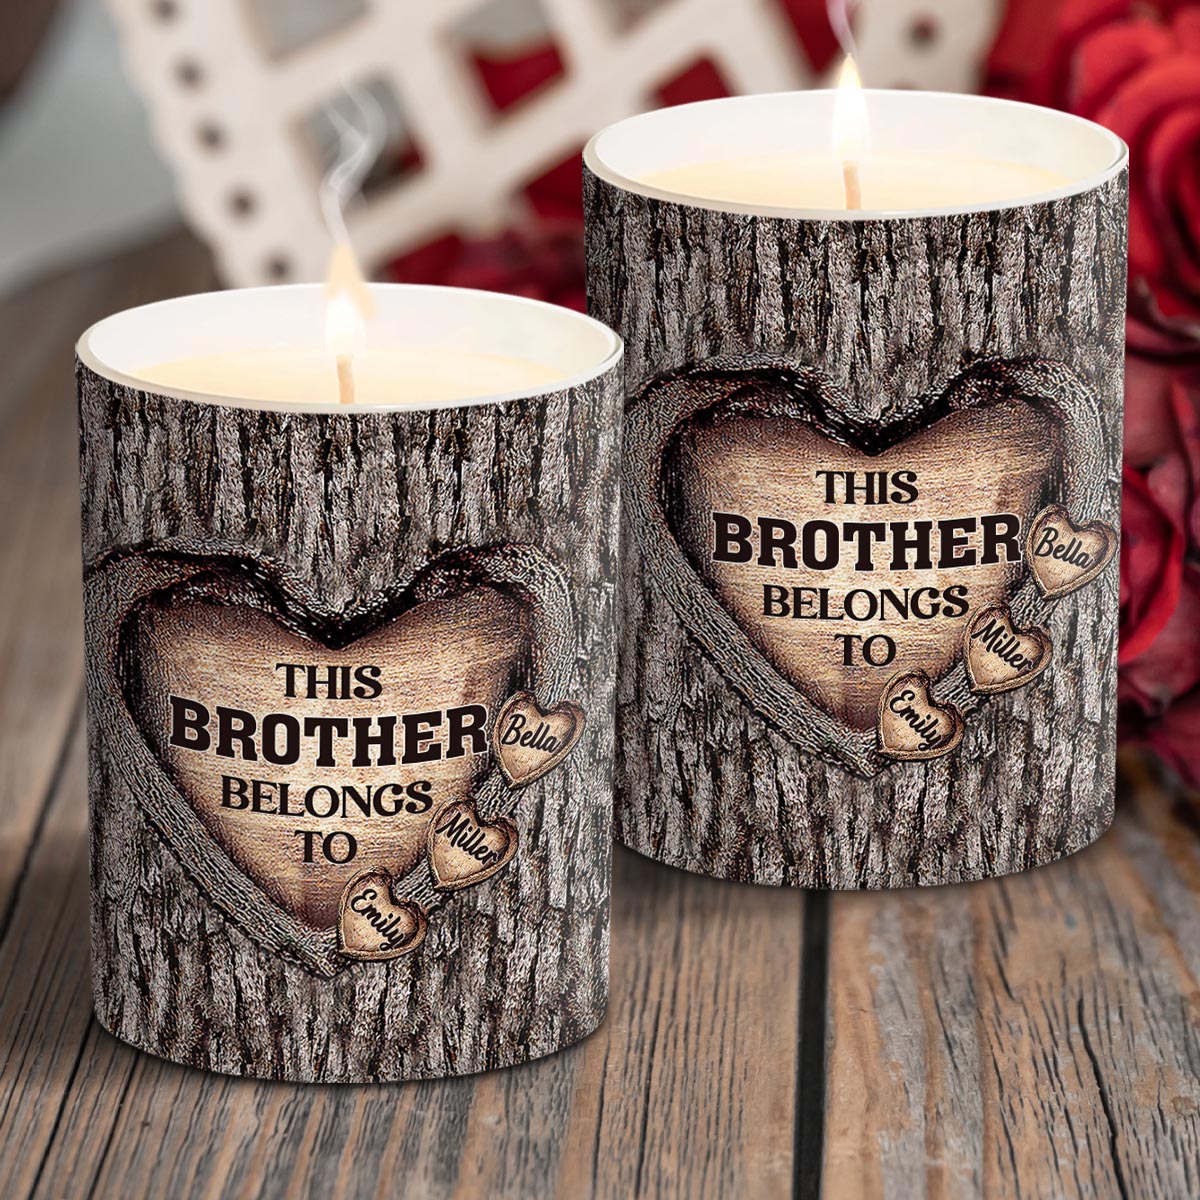 Dad's Heart - Gift for dad, grandma, grandpa, mom, uncle, aunt, brother, sister - Personalized Candle With Wooden Lid